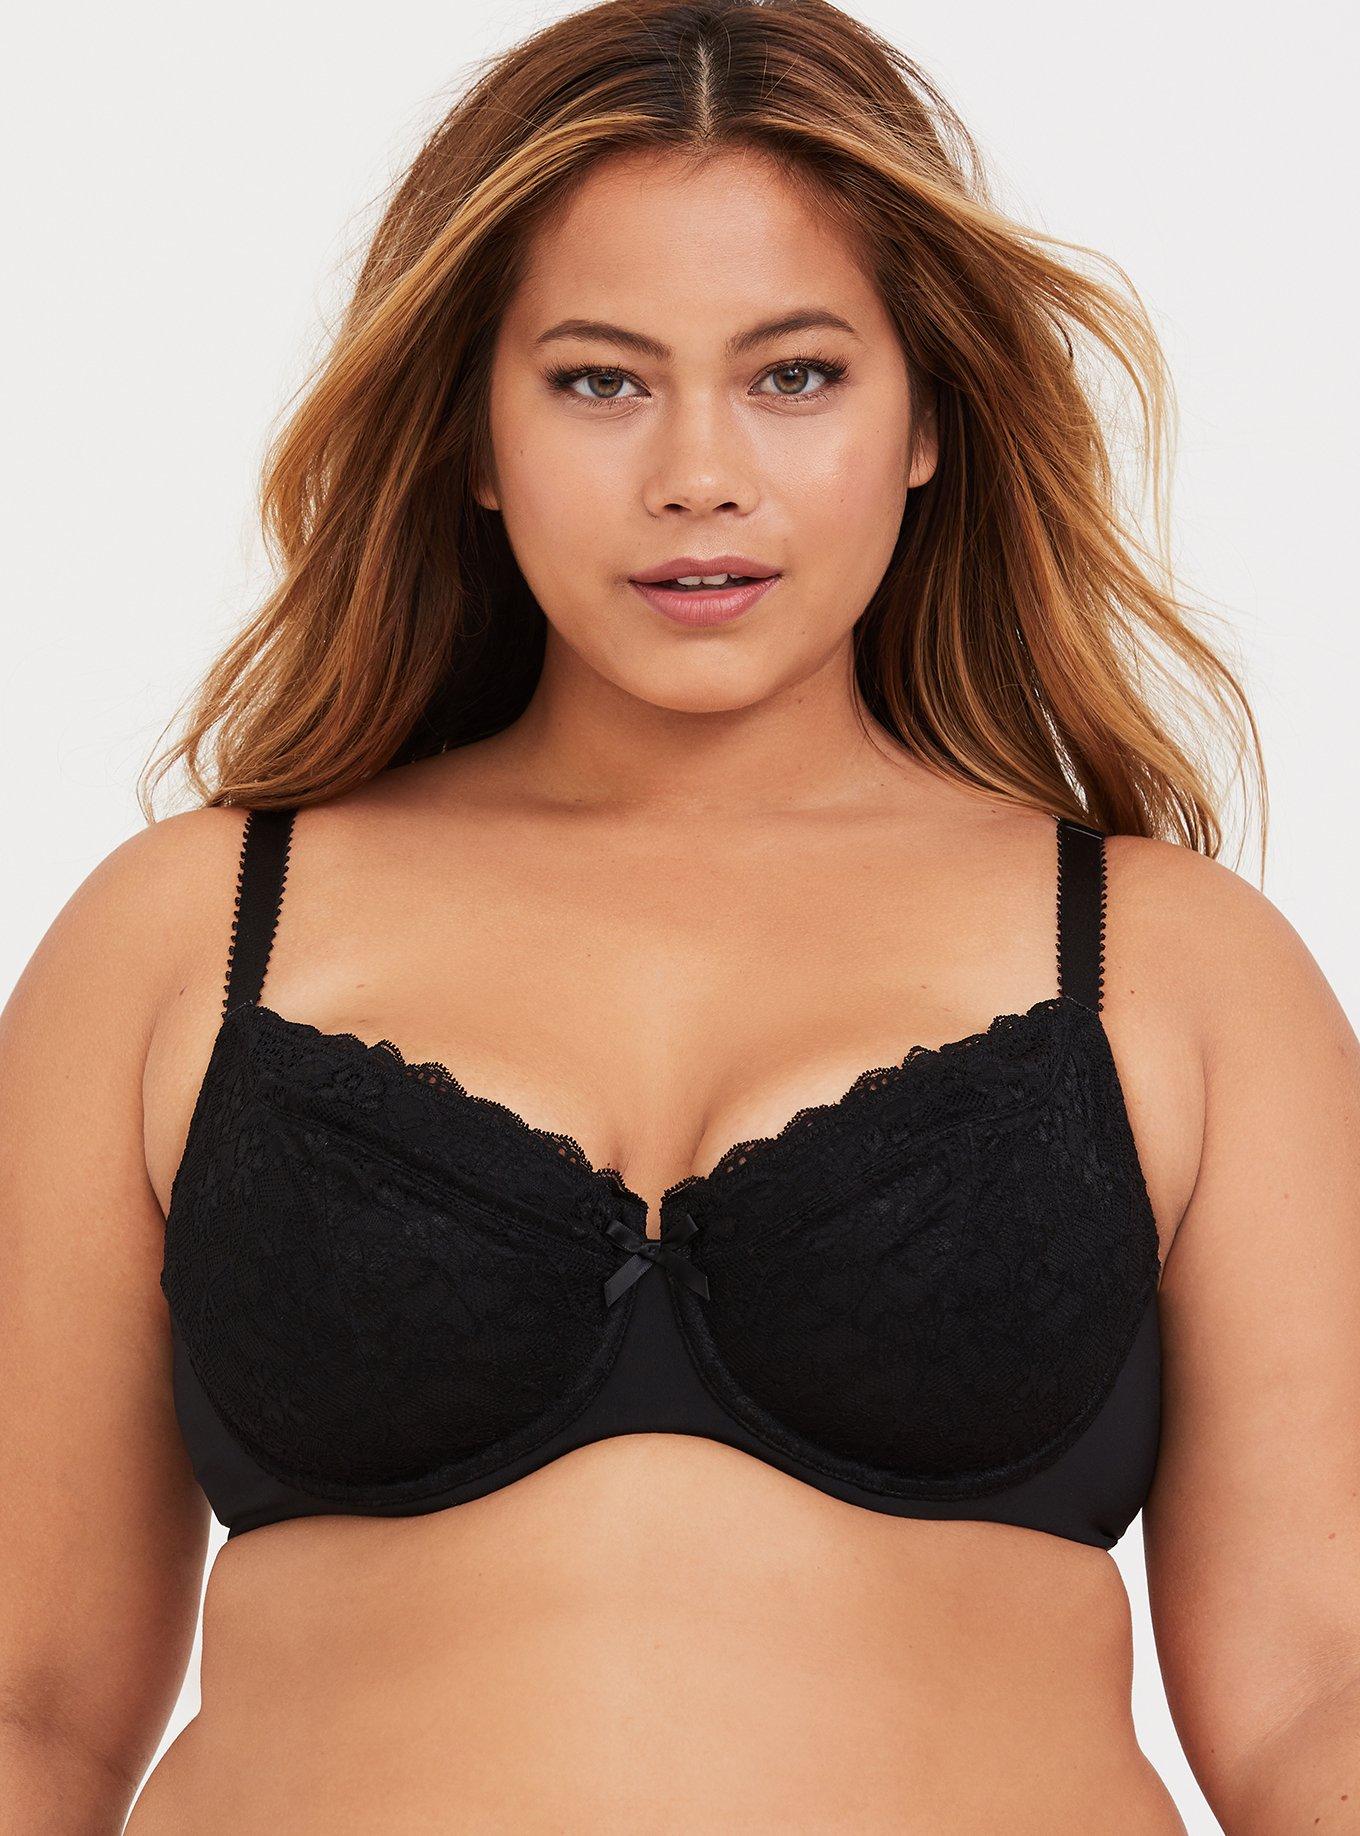 TOWED22 Plus Size Bras for Women,Womenâ€™s Lace Bra Plus Size Underwire  Embroidered Unlined Bra Non Padded Black,36/80B 